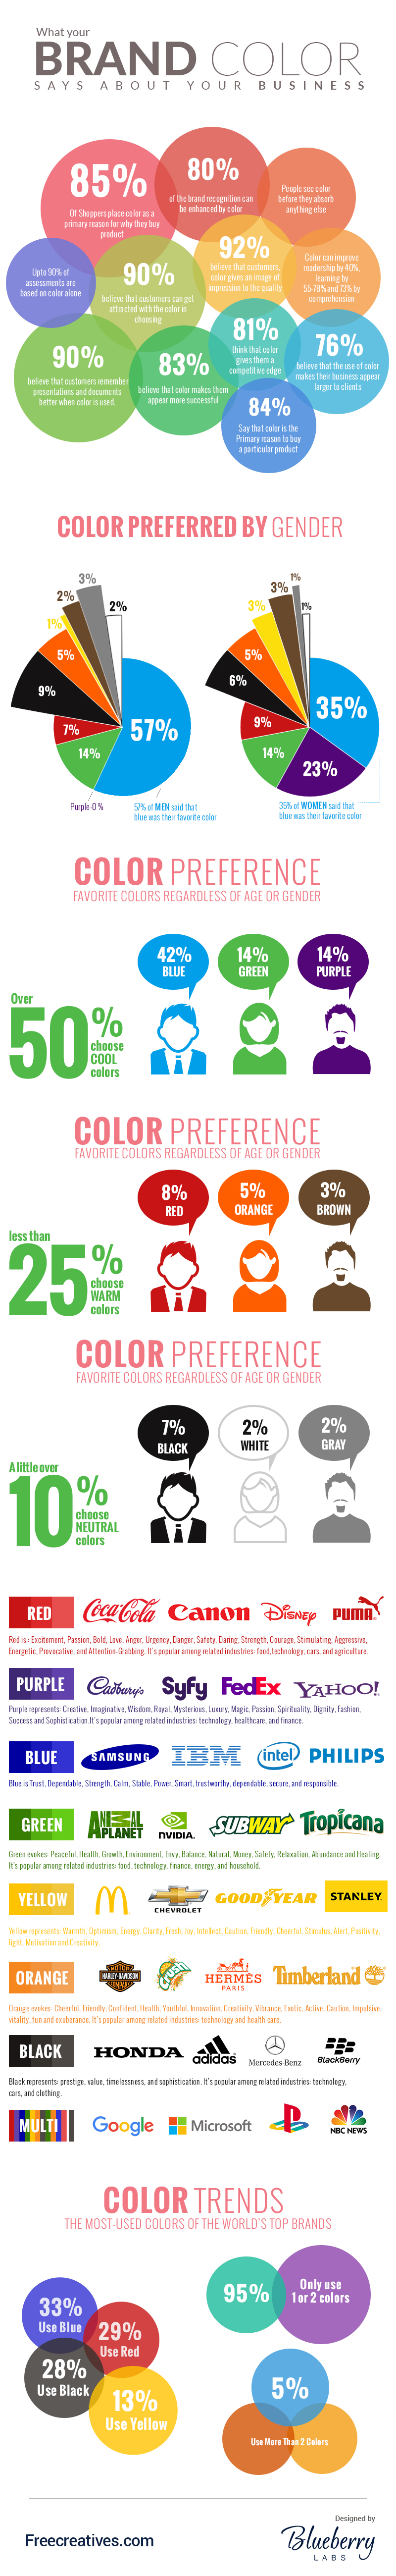 infographic-brand colors